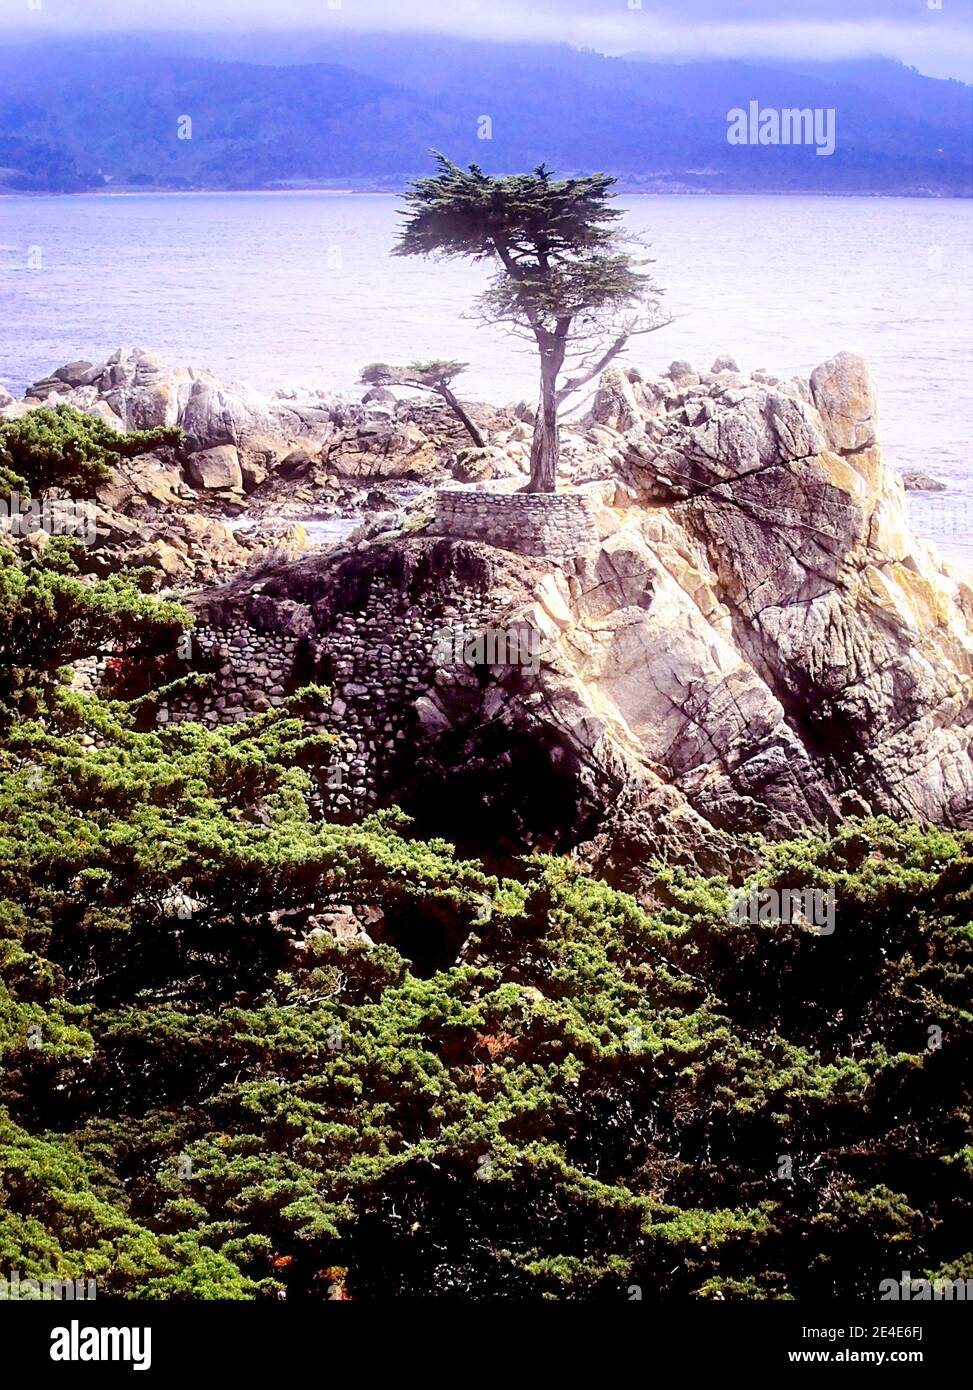 The Lone Cypress tree along the 17 mile drive on the Monterey peninsula in California. Stock Photo